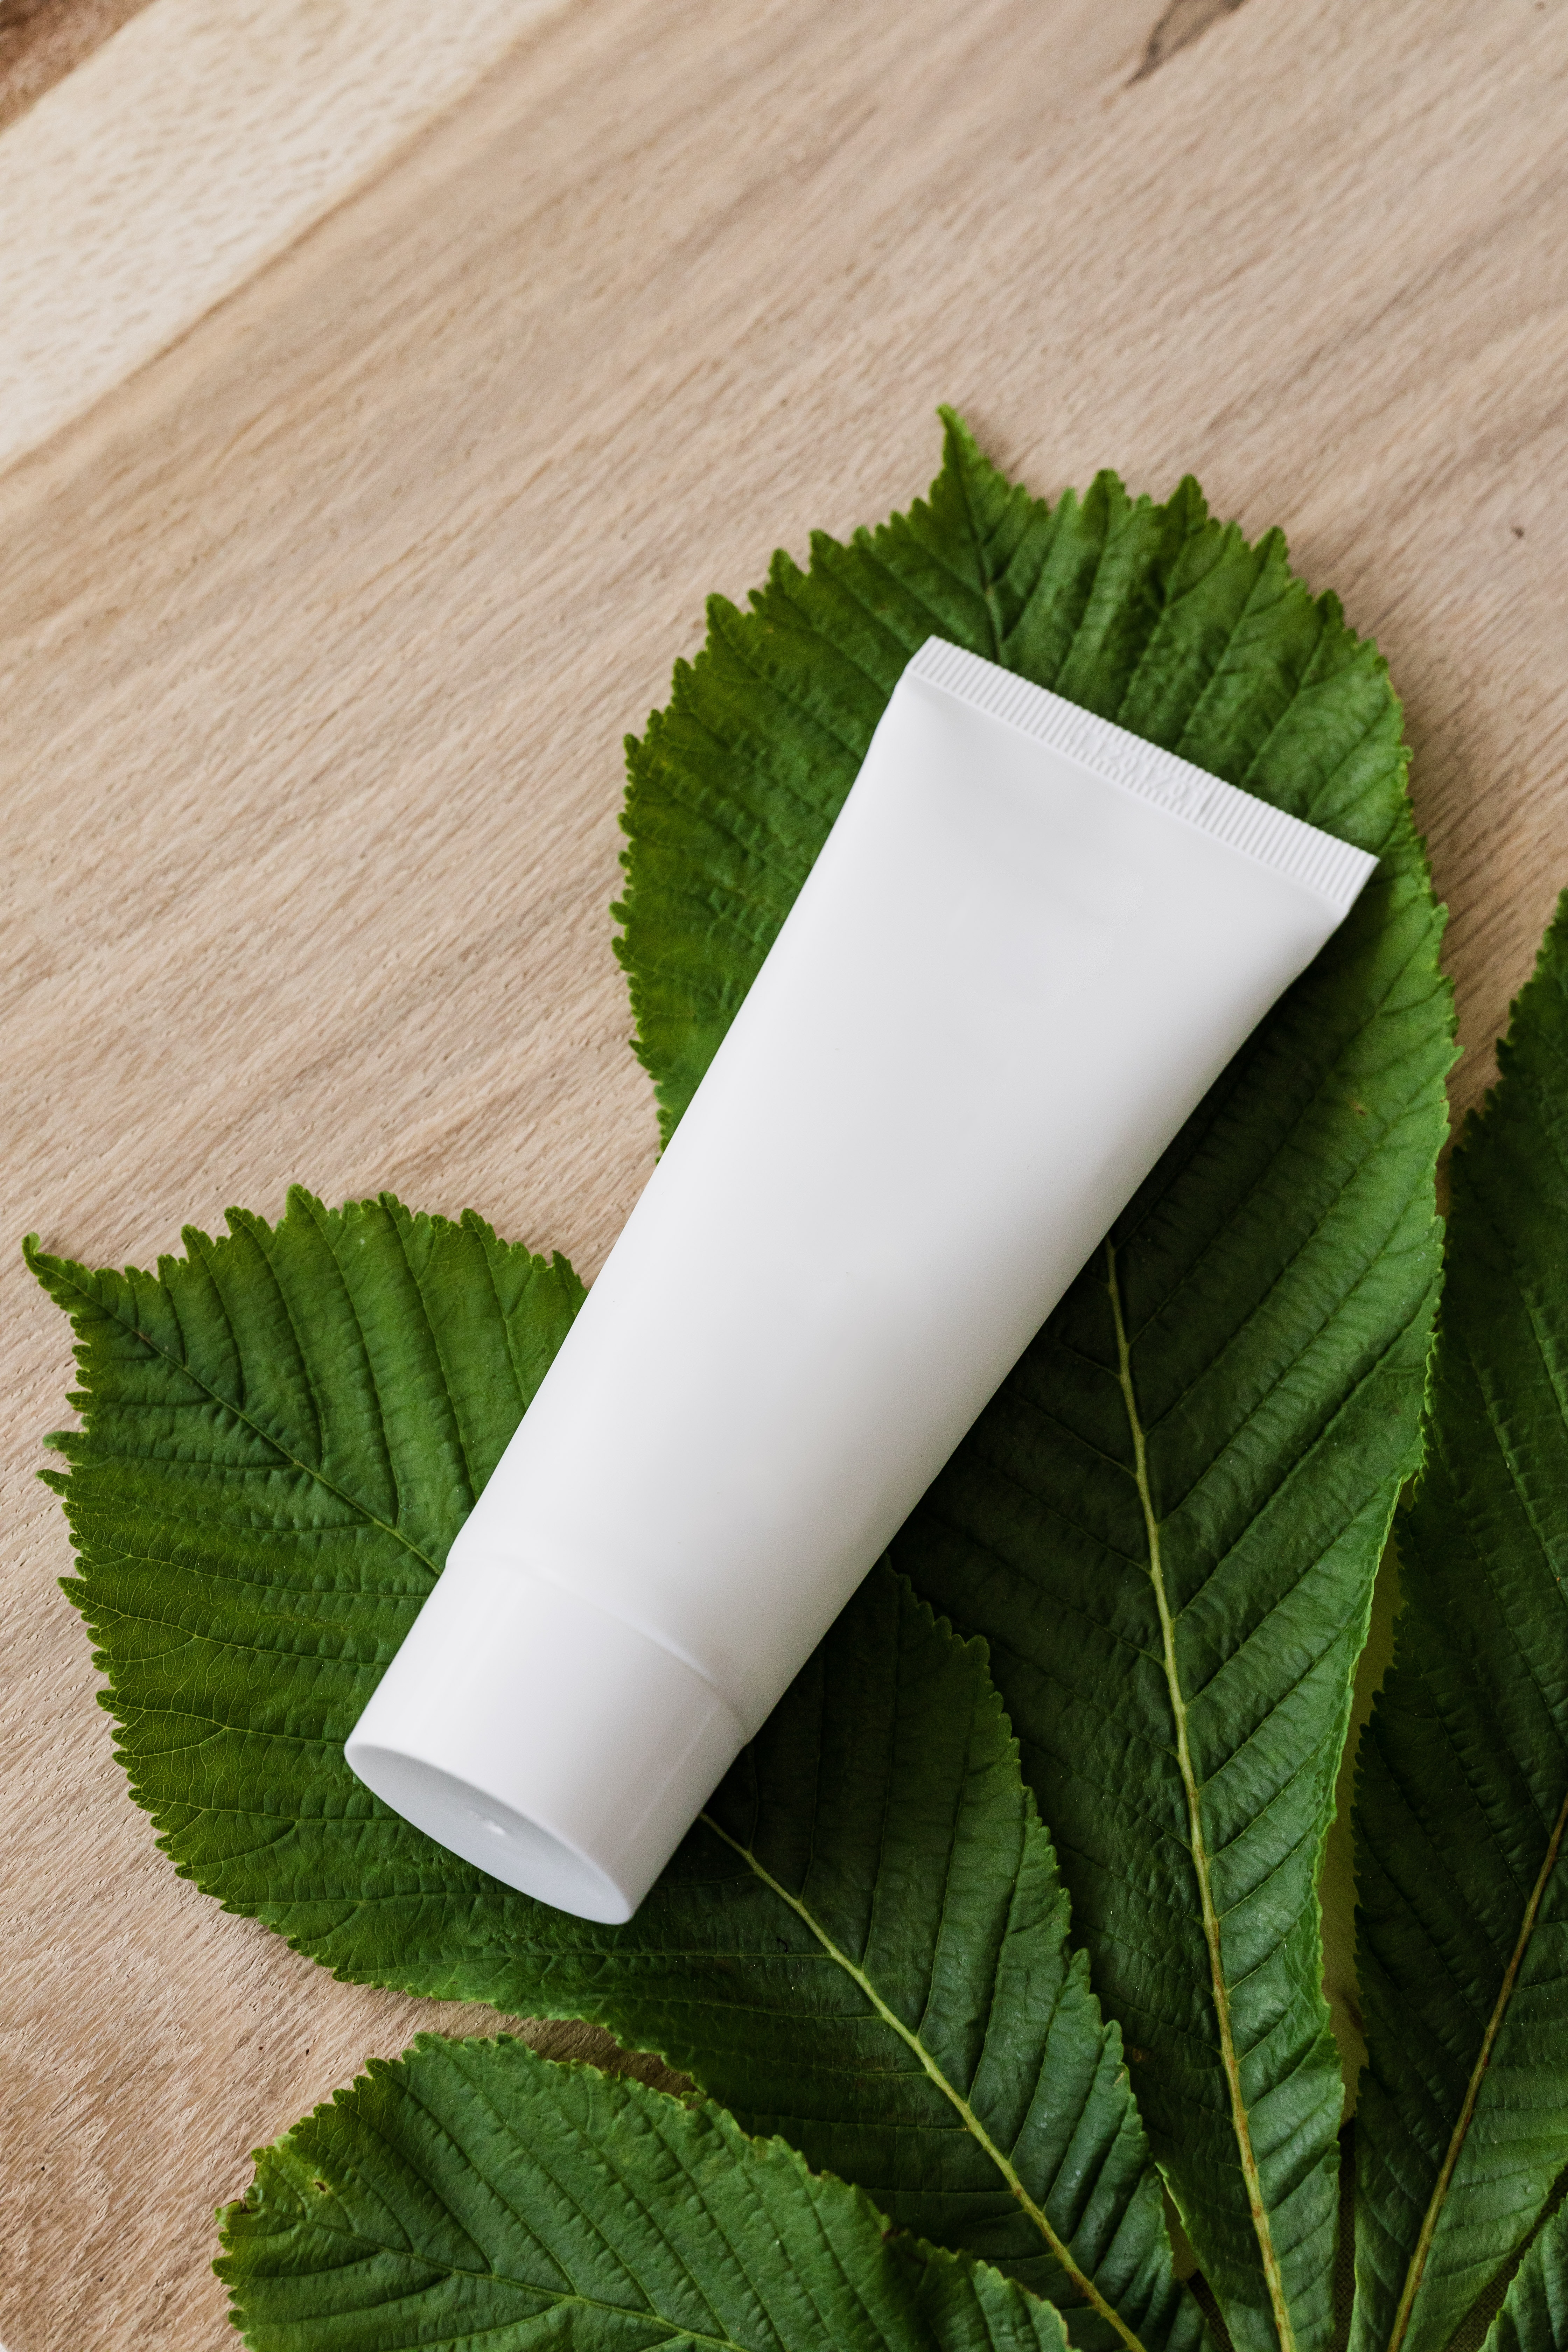 An image of a white plastic tube on top of some green leaves to represent choosing natural nontoxic skin care products